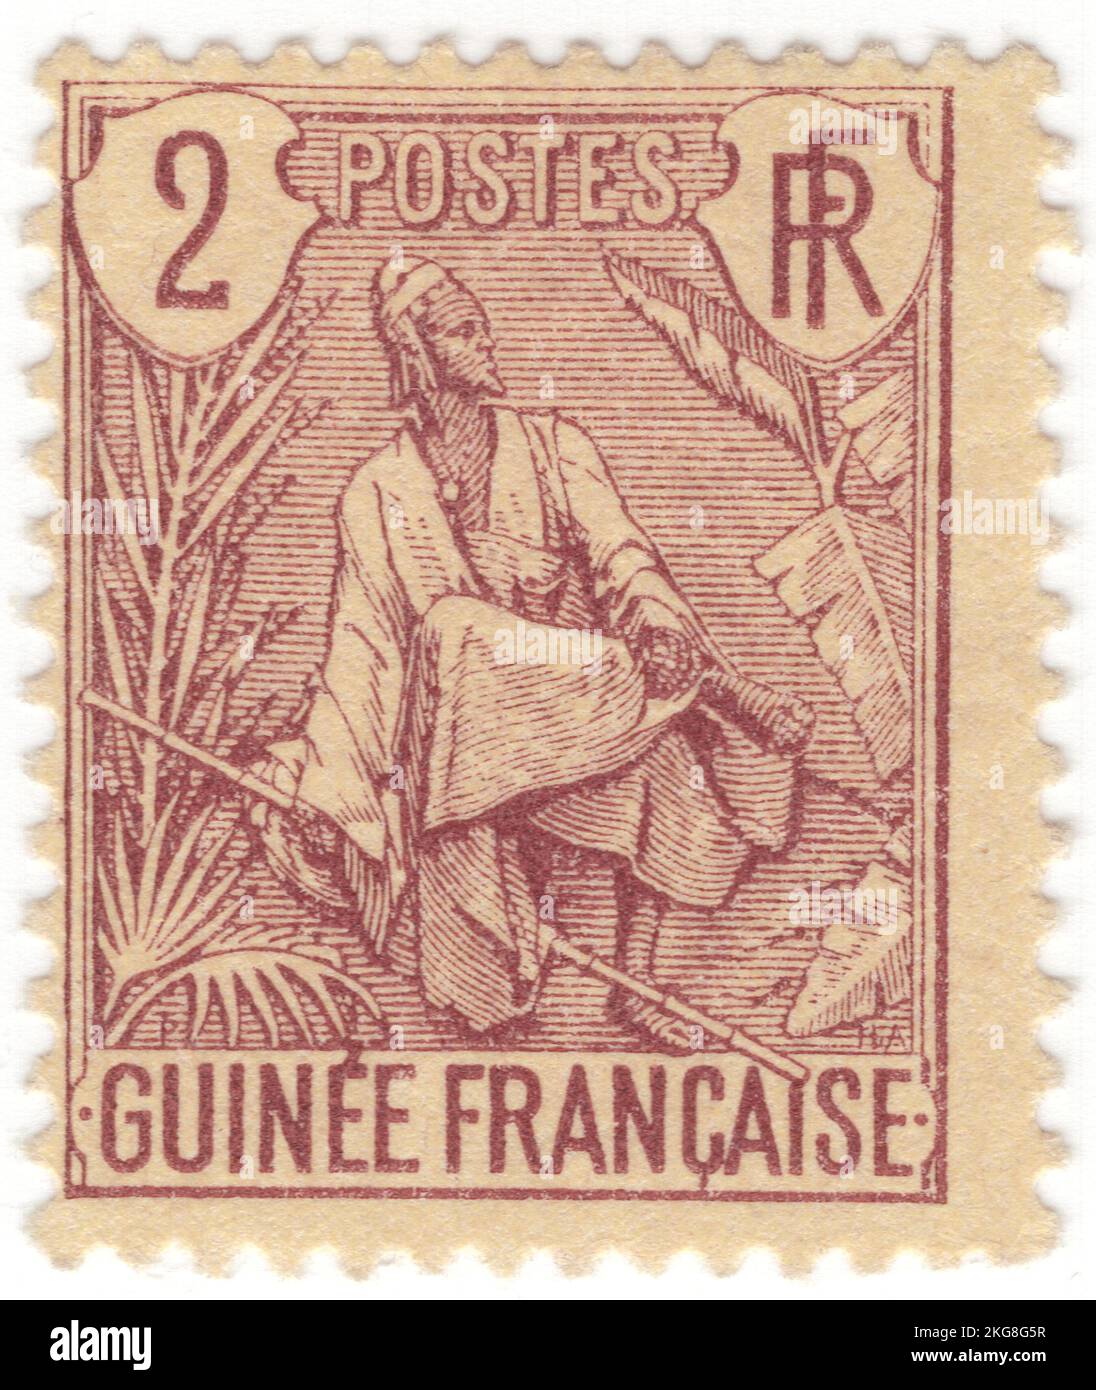 FRENCH GUINEA - 1904: An 2 centimes violet-brown on buff postage stamp depicting Fulah Shepherd. The Fula, Fulani, or Fulah people are one of the largest ethnic groups in the Sahel and West Africa, widely dispersed across the region. Inhabiting many countries, they live mainly in West Africa and northern parts of Central Africa, South Sudan, Darfur, and regions near the Red Sea coast in Sudan. The approximate number of Fula people is unknown due to clashing definitions regarding Fula ethnicity. Various estimates put the figure between 25 and 40 million people worldwide Stock Photo